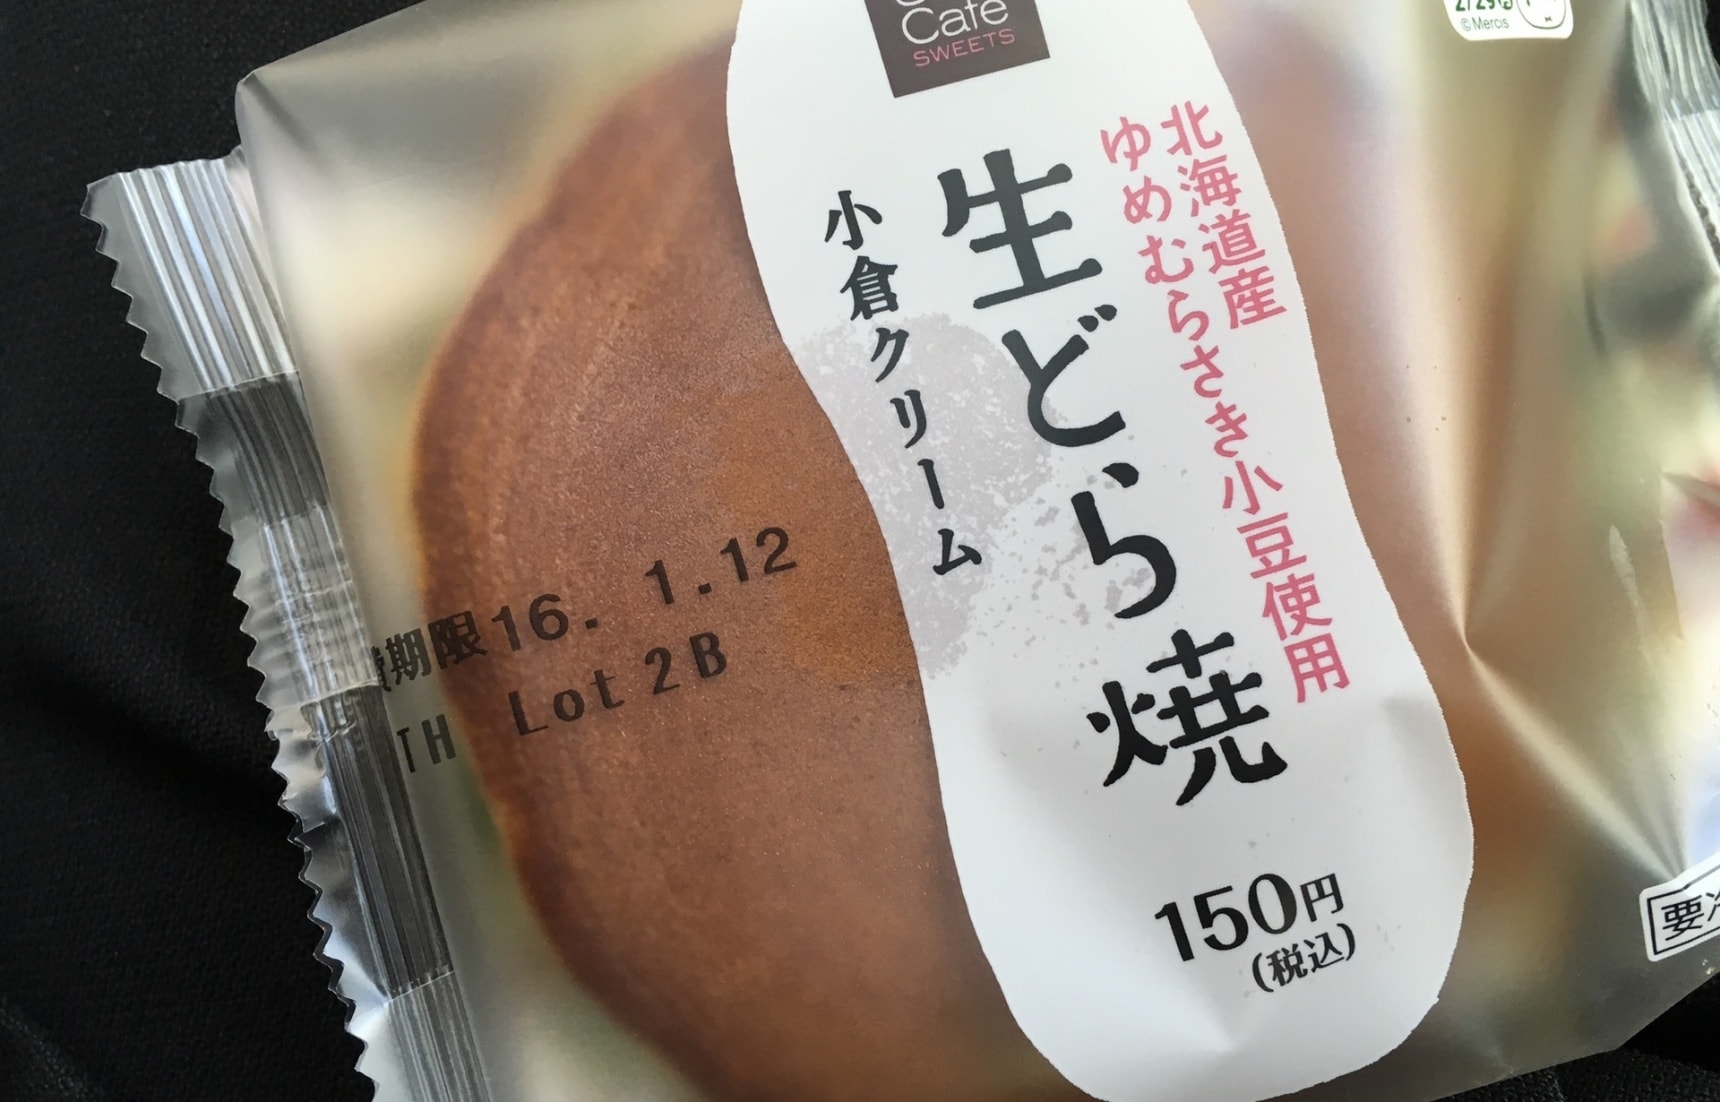 Top 8 Gourmet Convenience Store Sweets